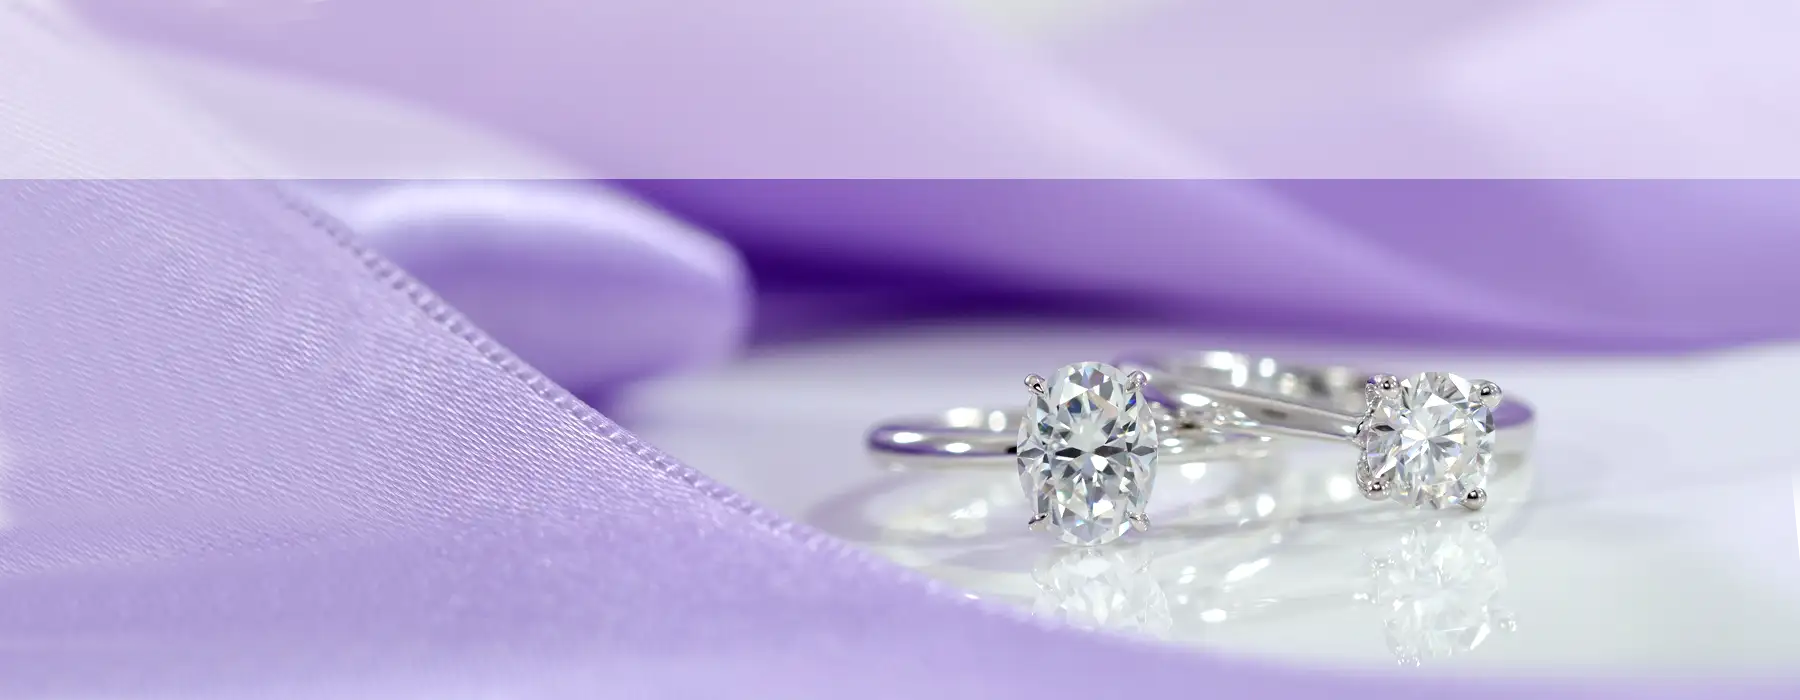 promise rings and petite engagement rings affordable at Quorri